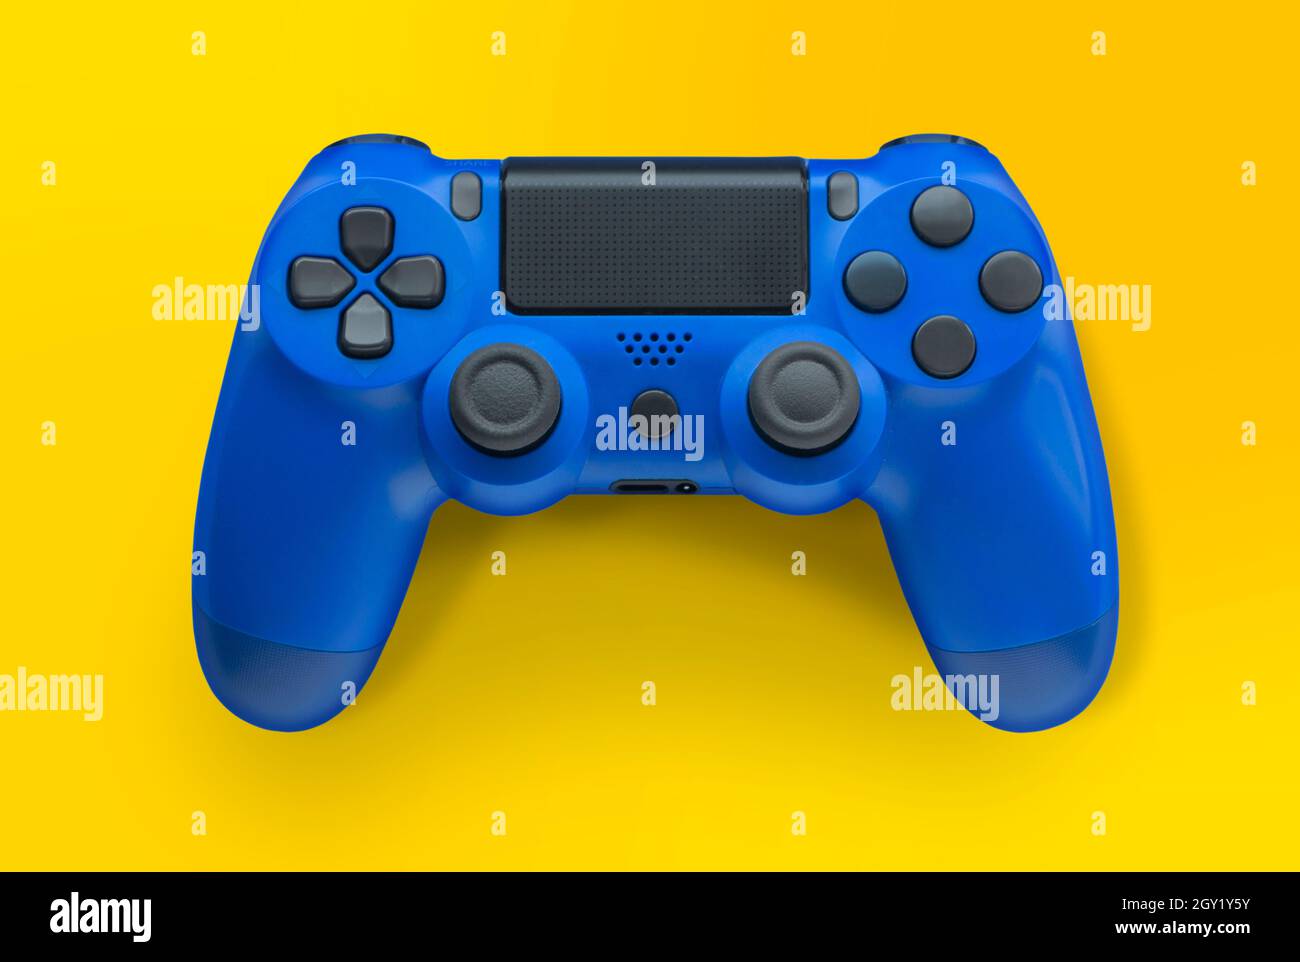 Blue video game controller isolated on a yellow background Stock Photo